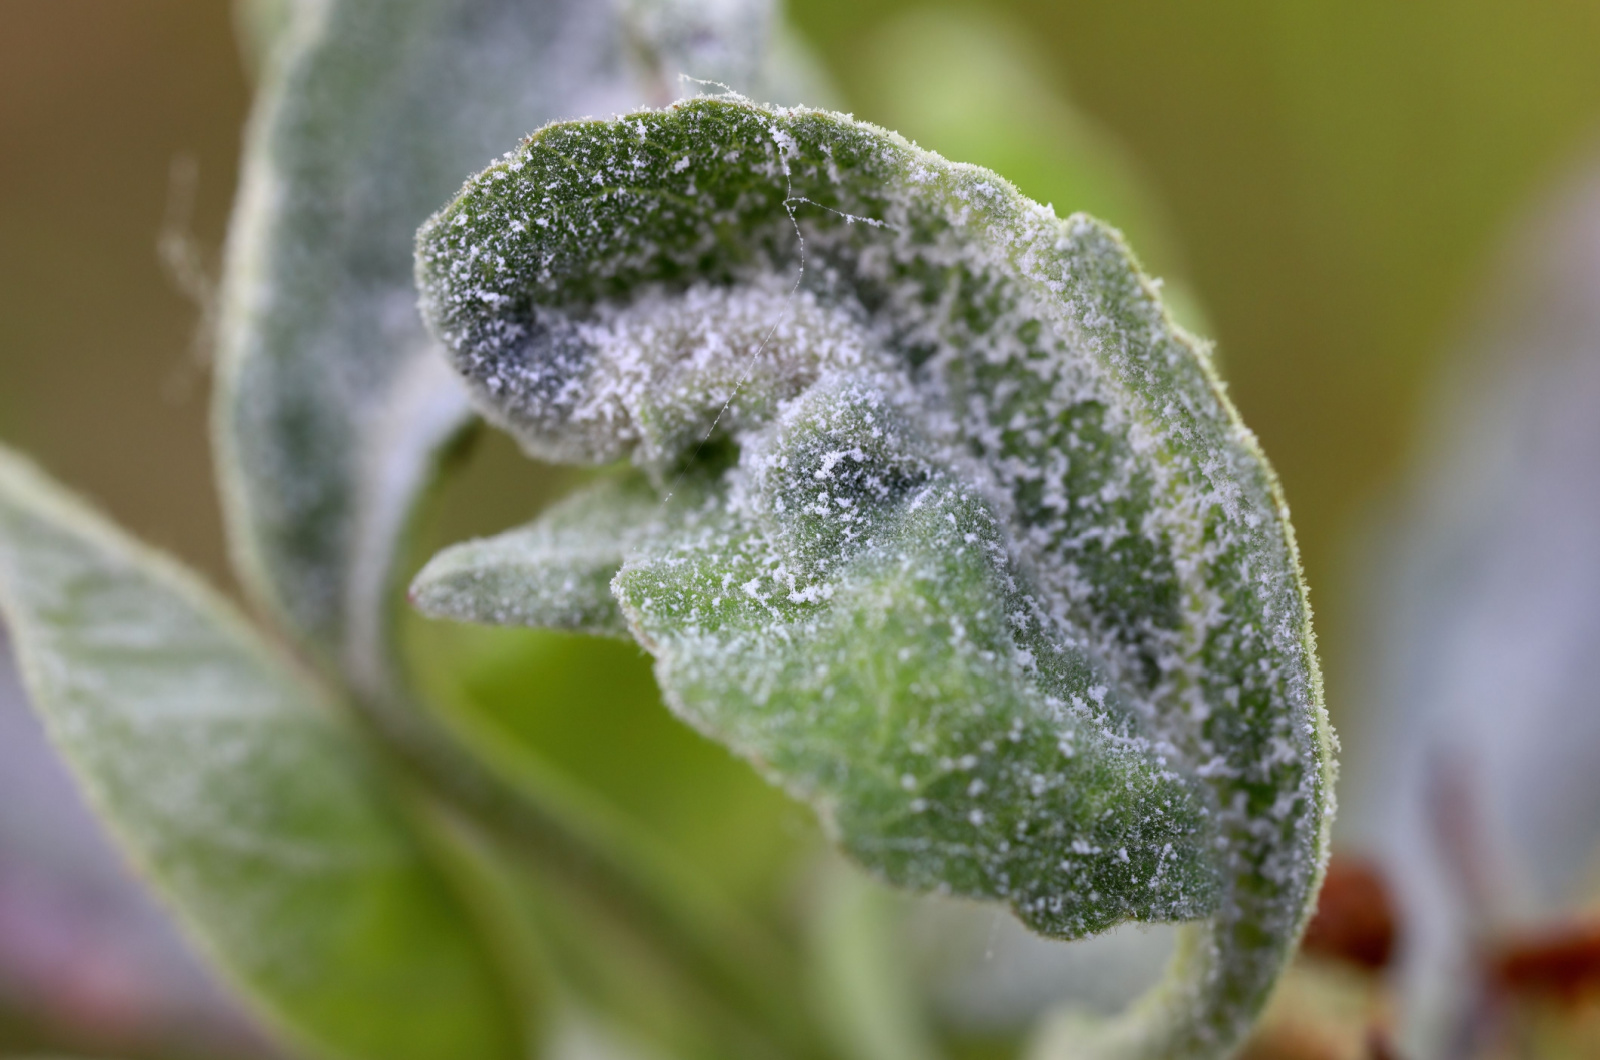 infection of powdery mildew on leaves